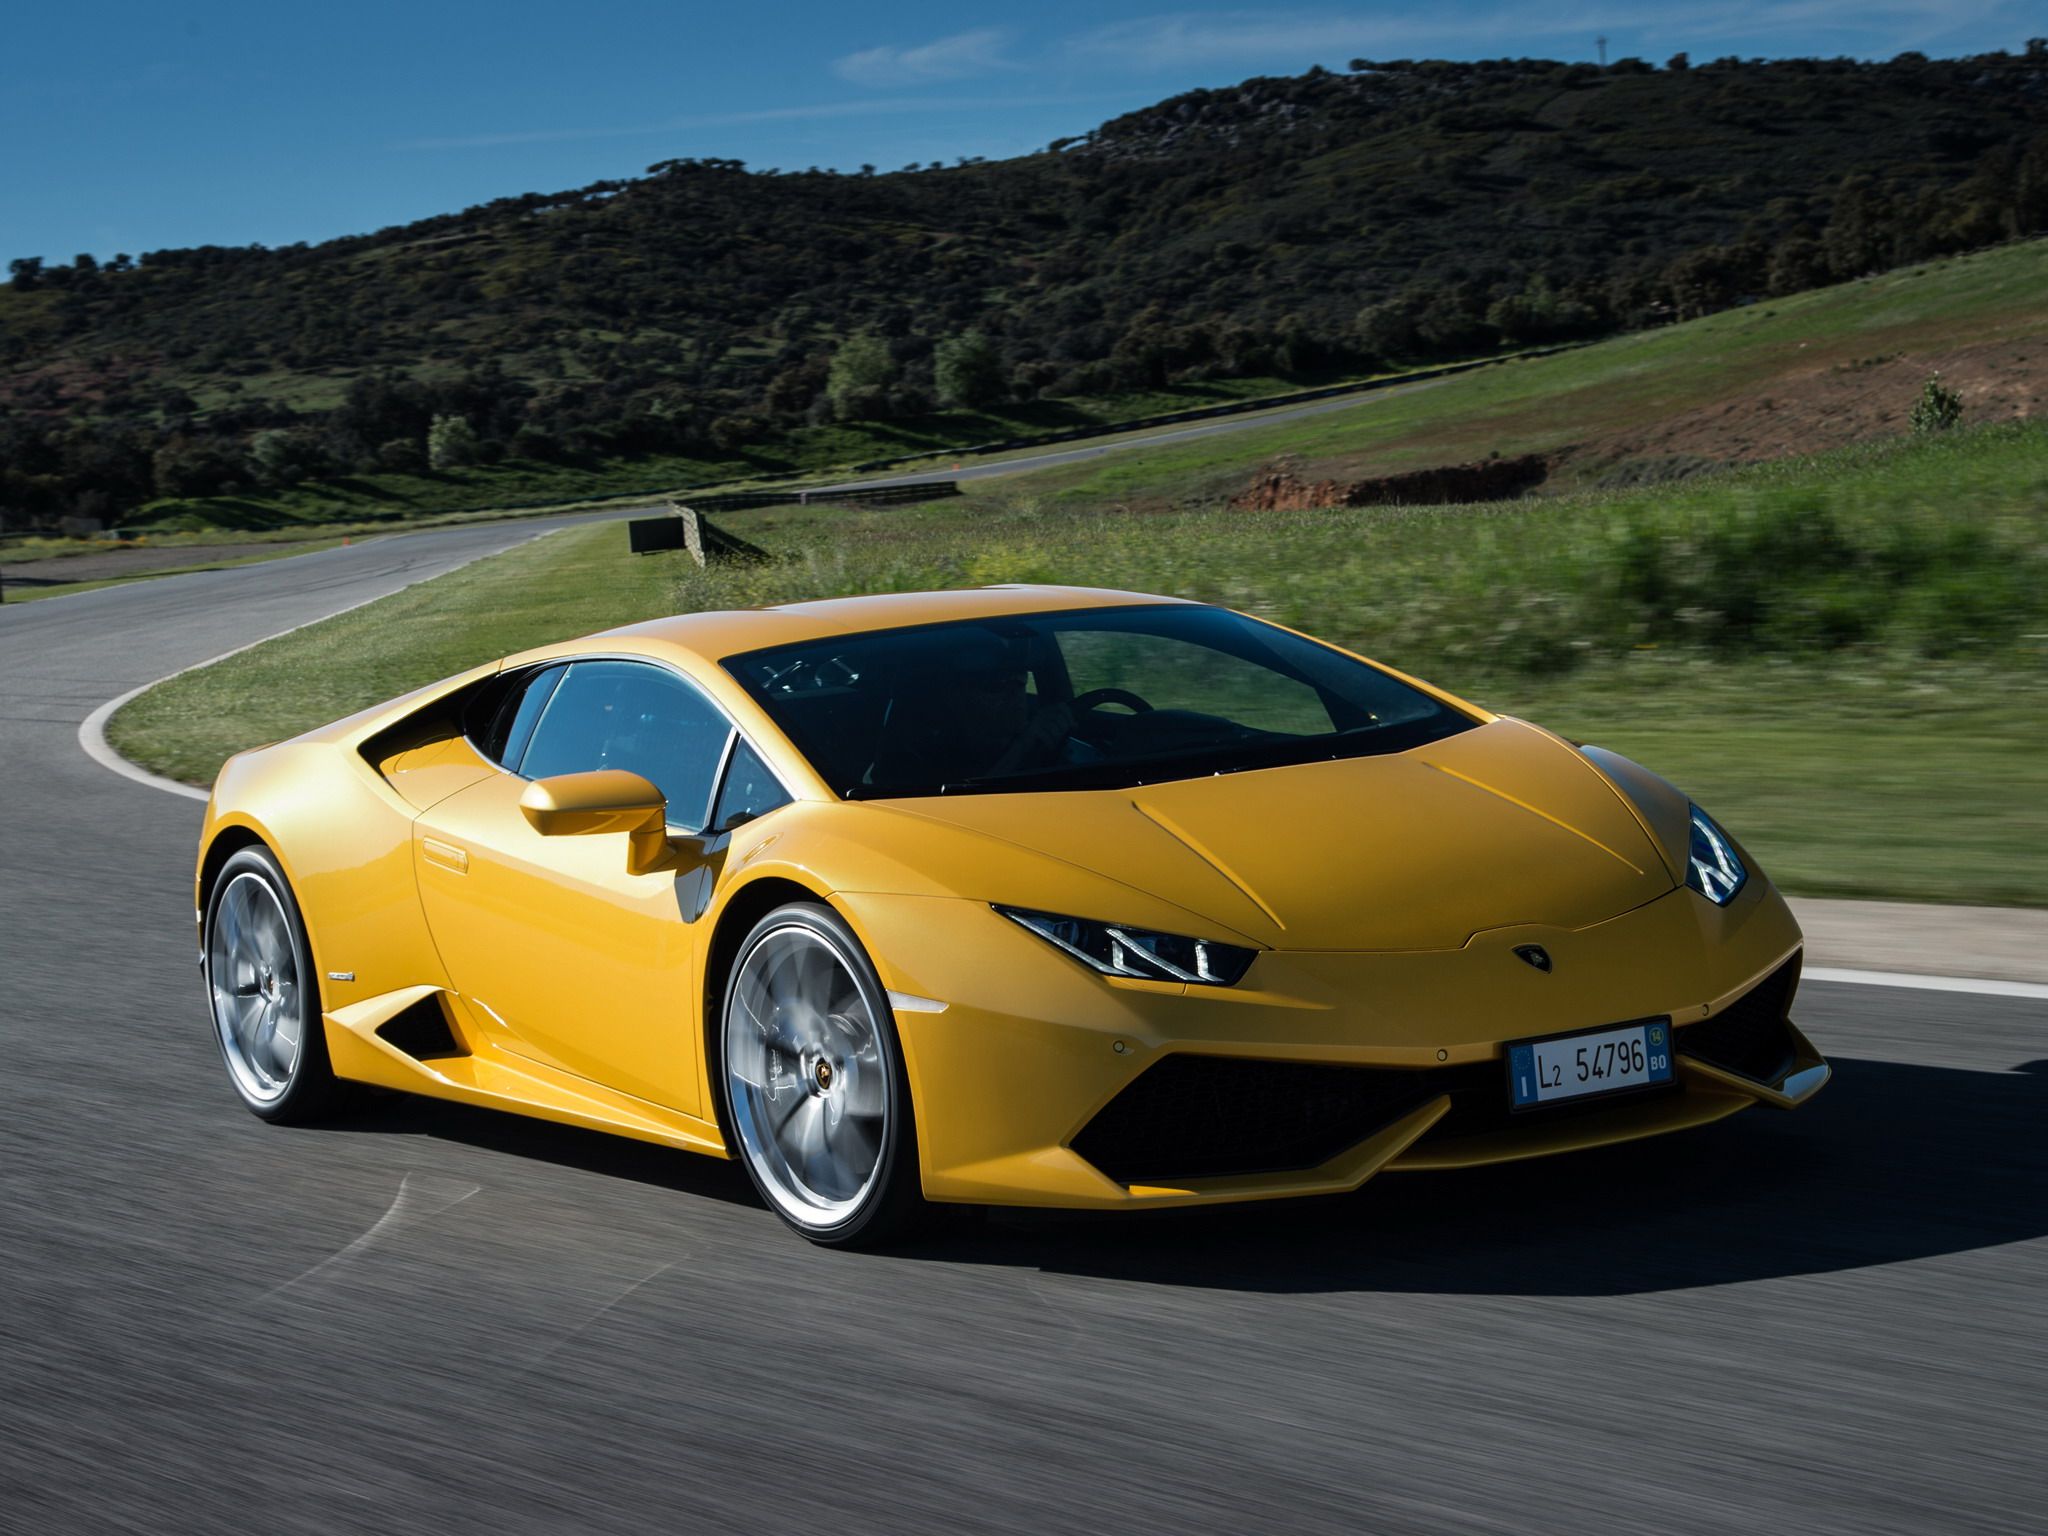 2018 The Raging Bull Is On Fire: Lamborghini Posts Record Sales in 2017